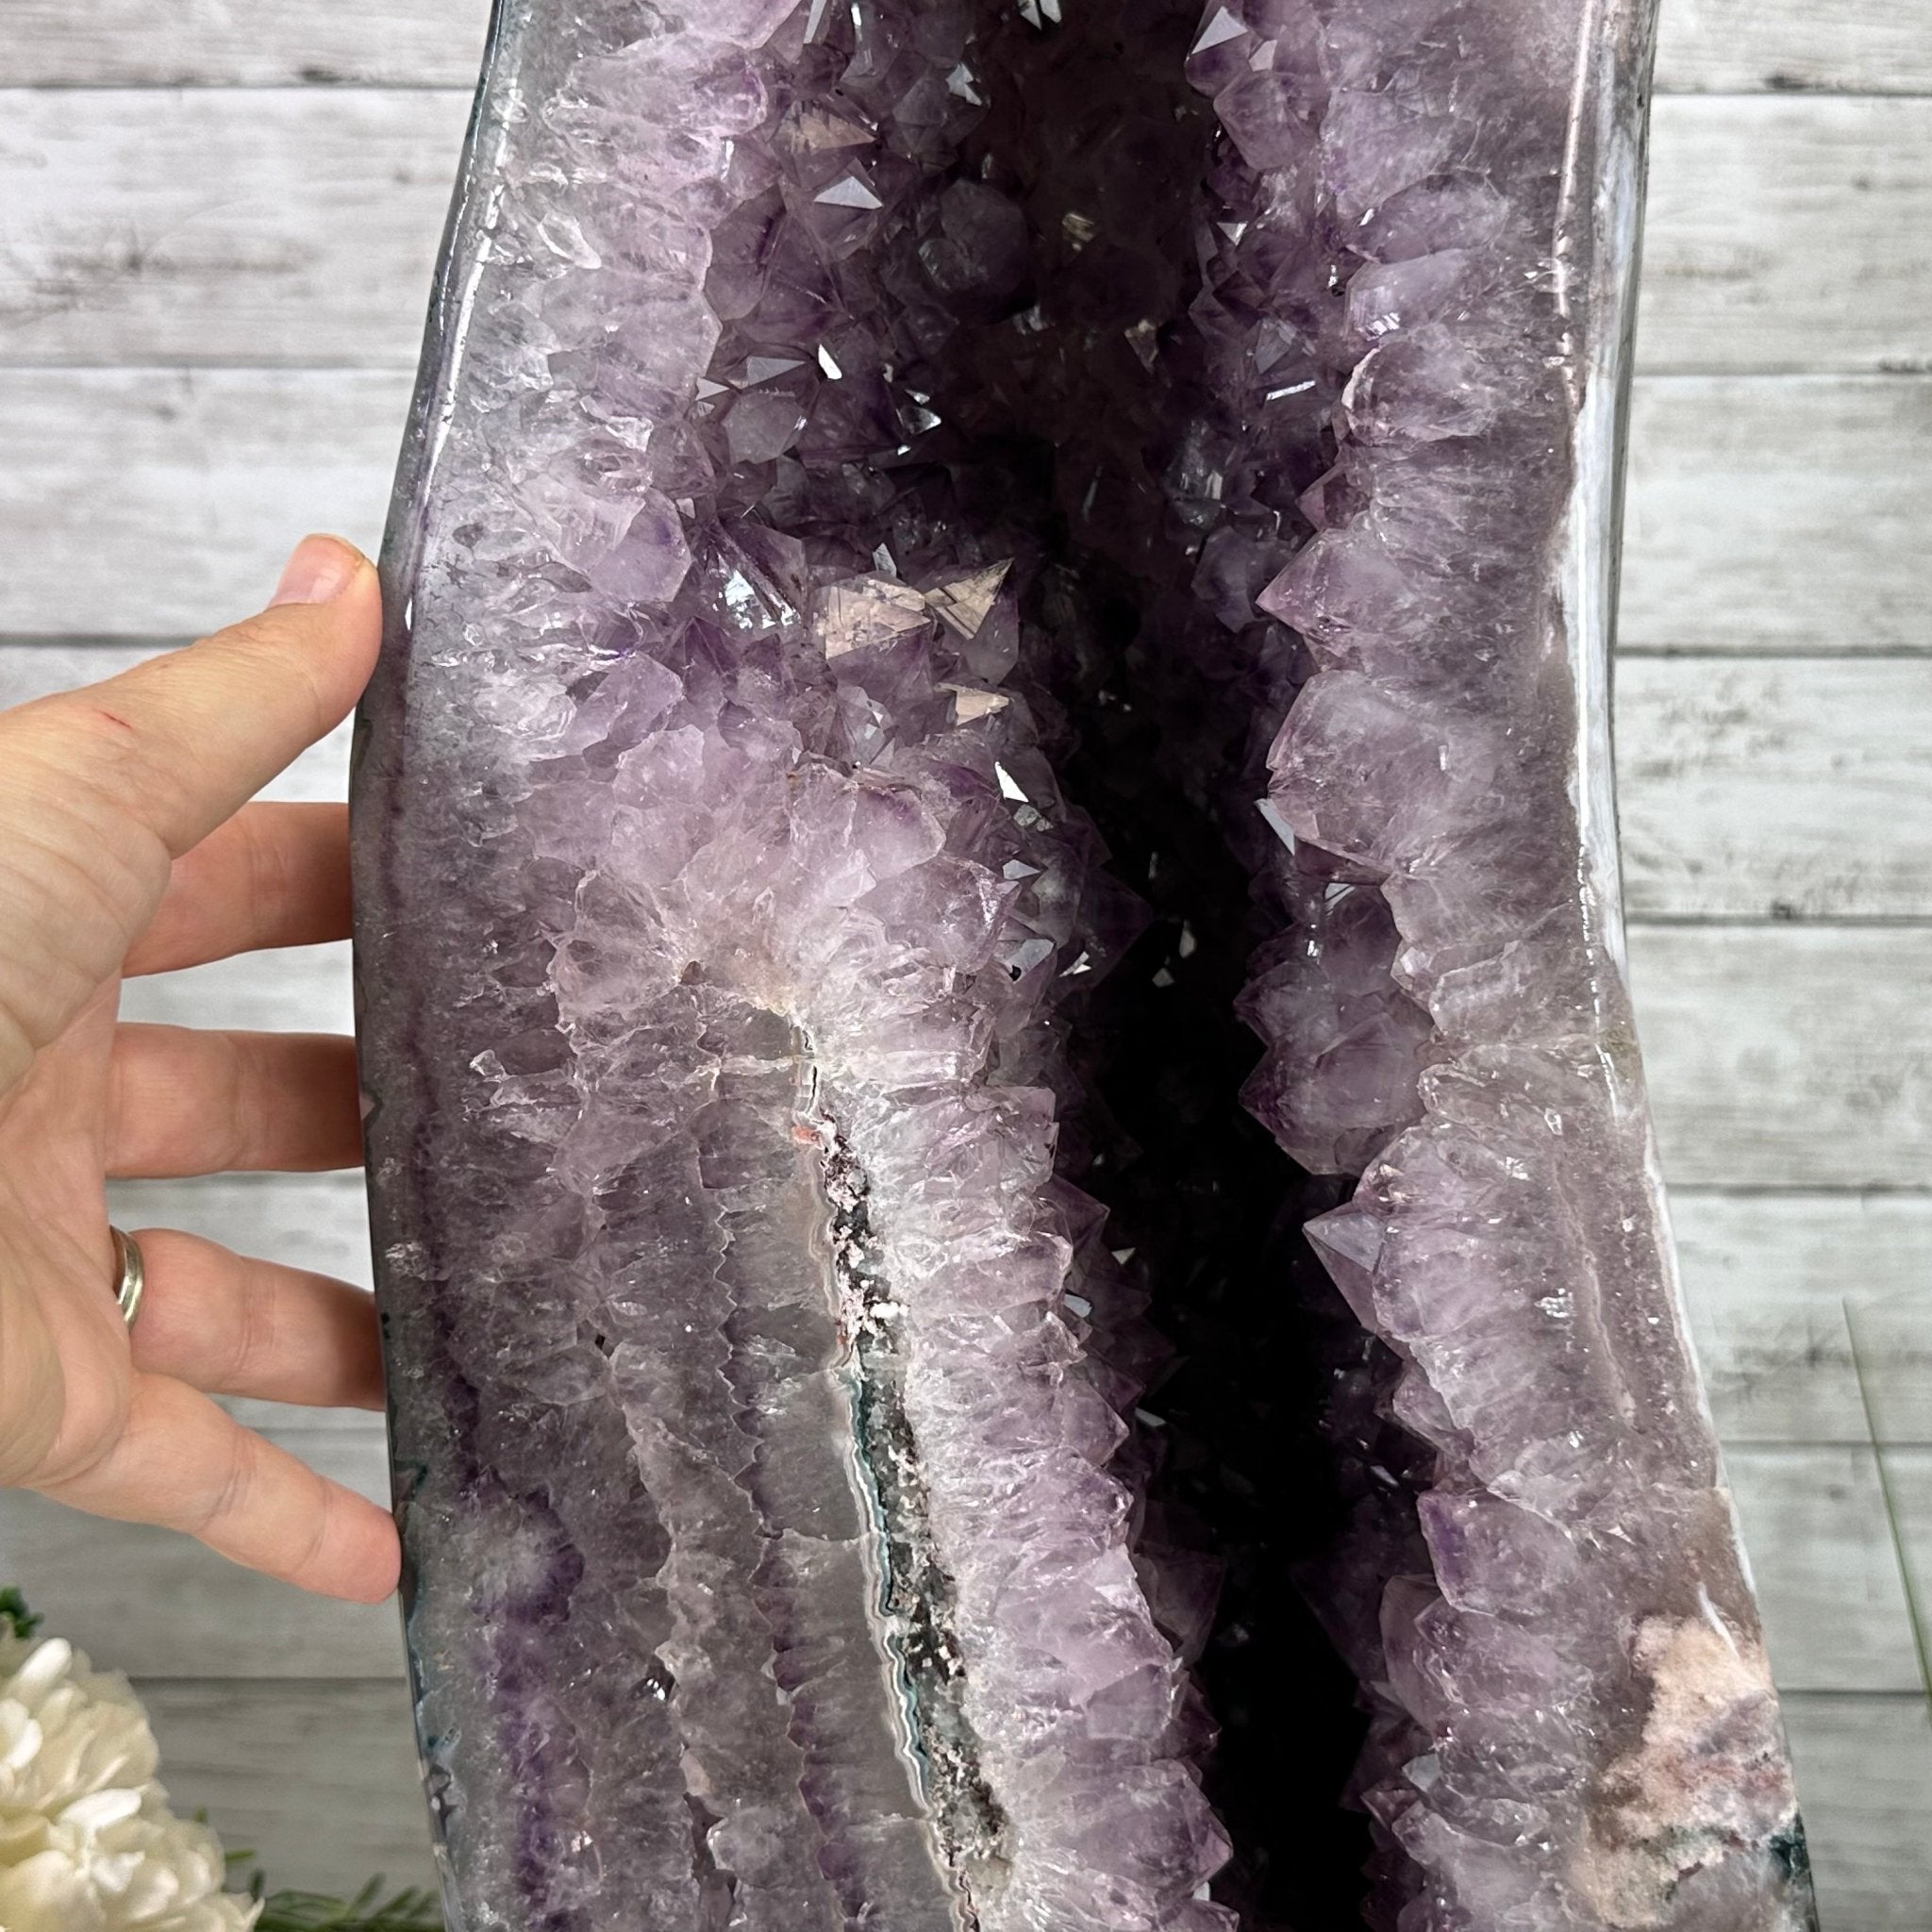 Extra Quality Polished Brazilian Amethyst Cathedral, 78.6 lbs & 24.5" tall Model #5602-0178 by Brazil Gems - Brazil GemsBrazil GemsExtra Quality Polished Brazilian Amethyst Cathedral, 78.6 lbs & 24.5" tall Model #5602-0178 by Brazil GemsPolished Cathedrals5602-0178